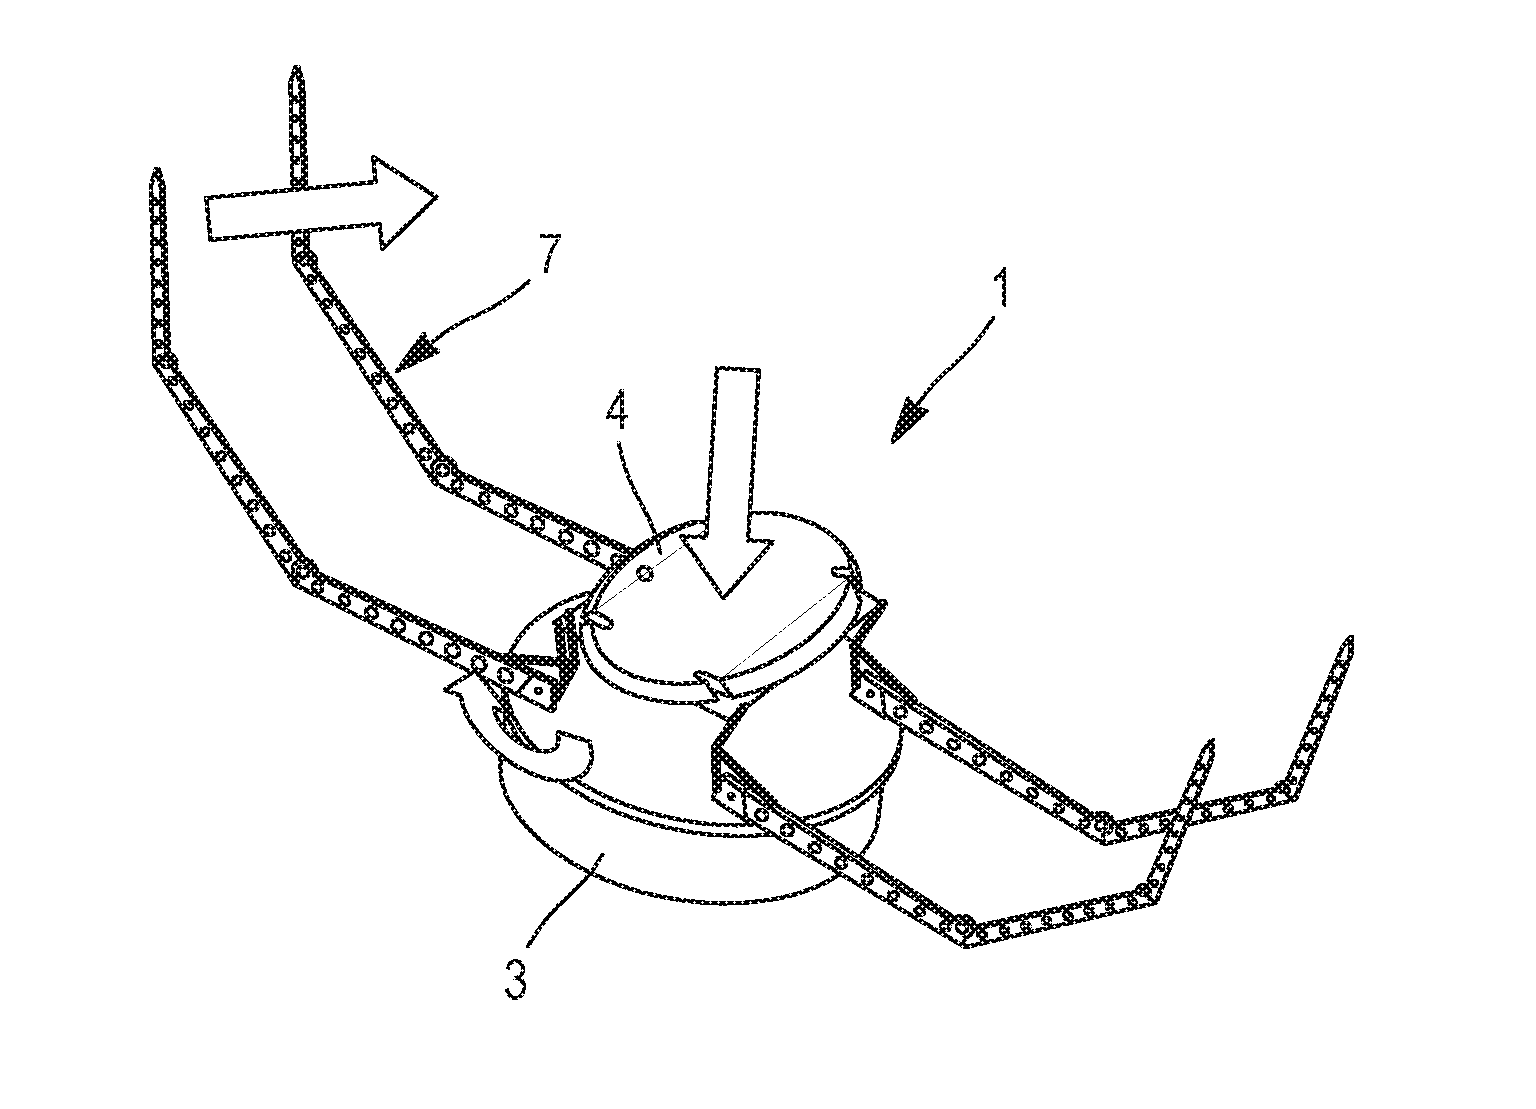 Device for sensing a space object, including a pressure element and at least two resealable elements on the space object